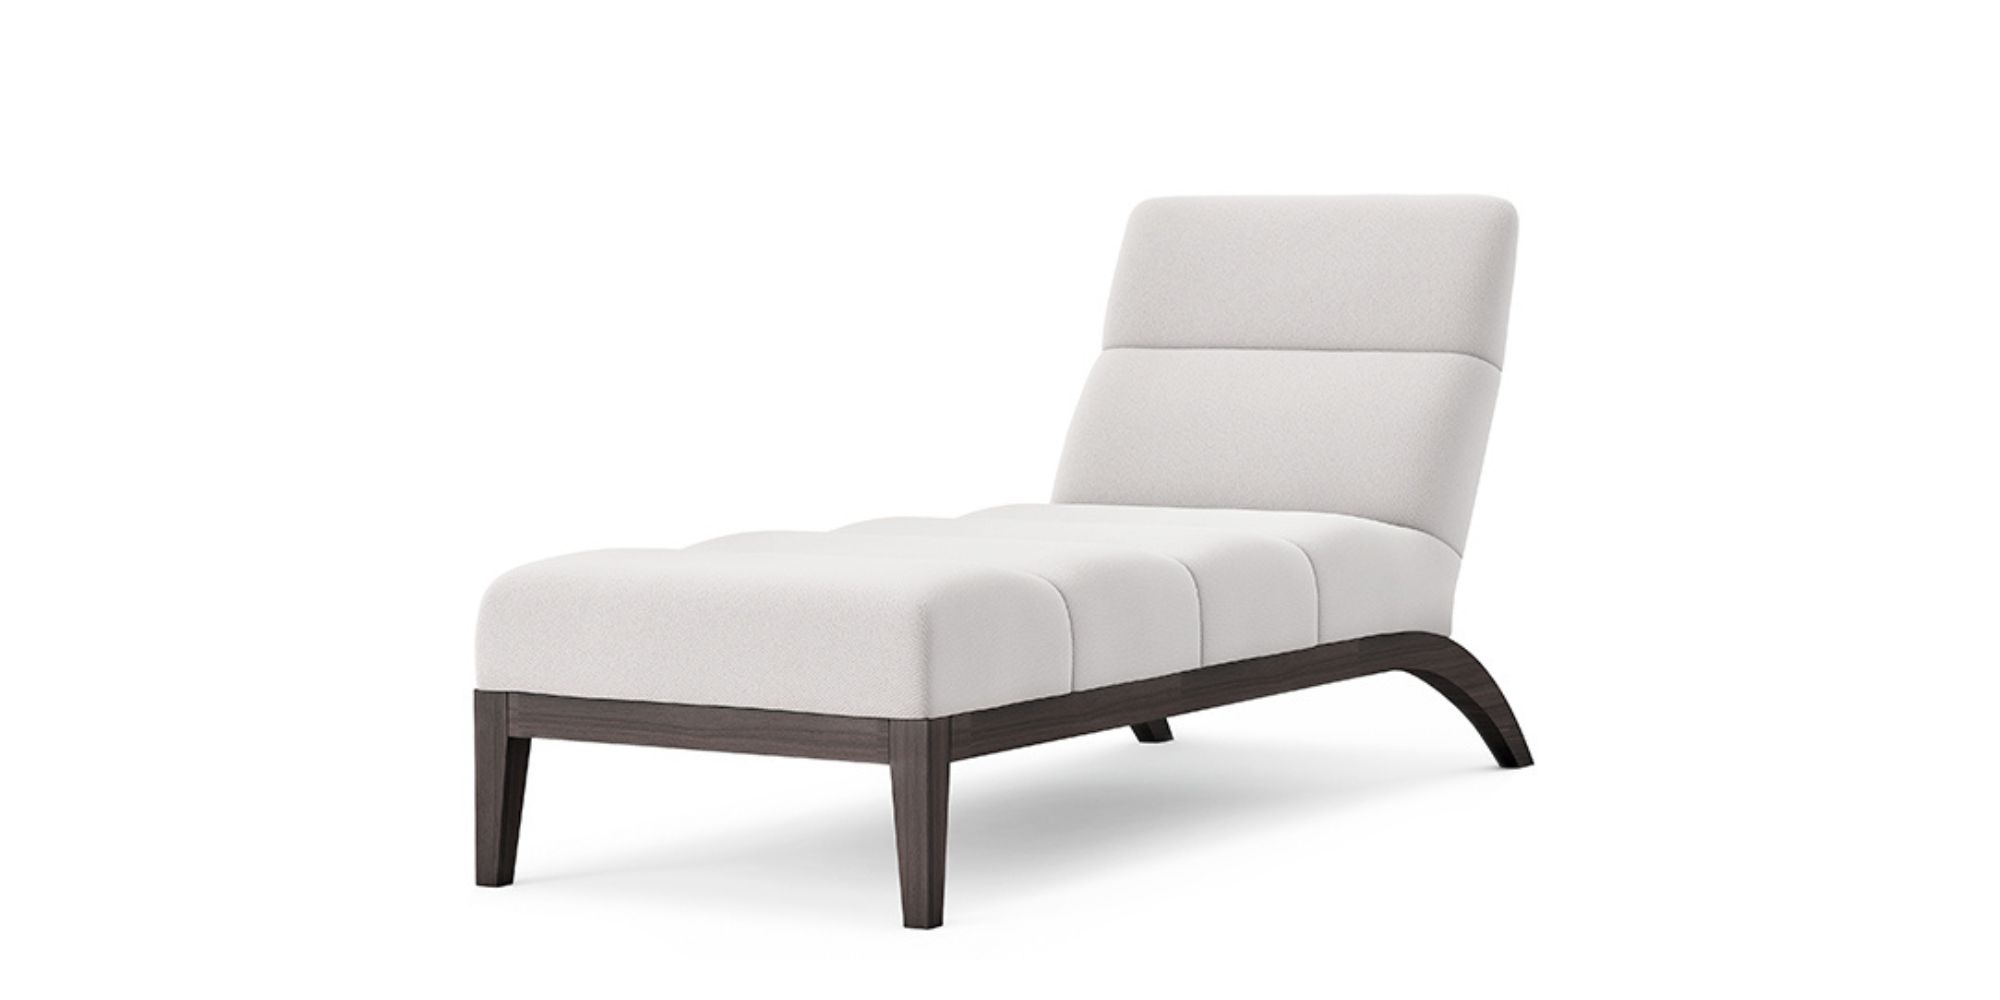 Folie Sofa in Outdoor Sofas for Folie collection